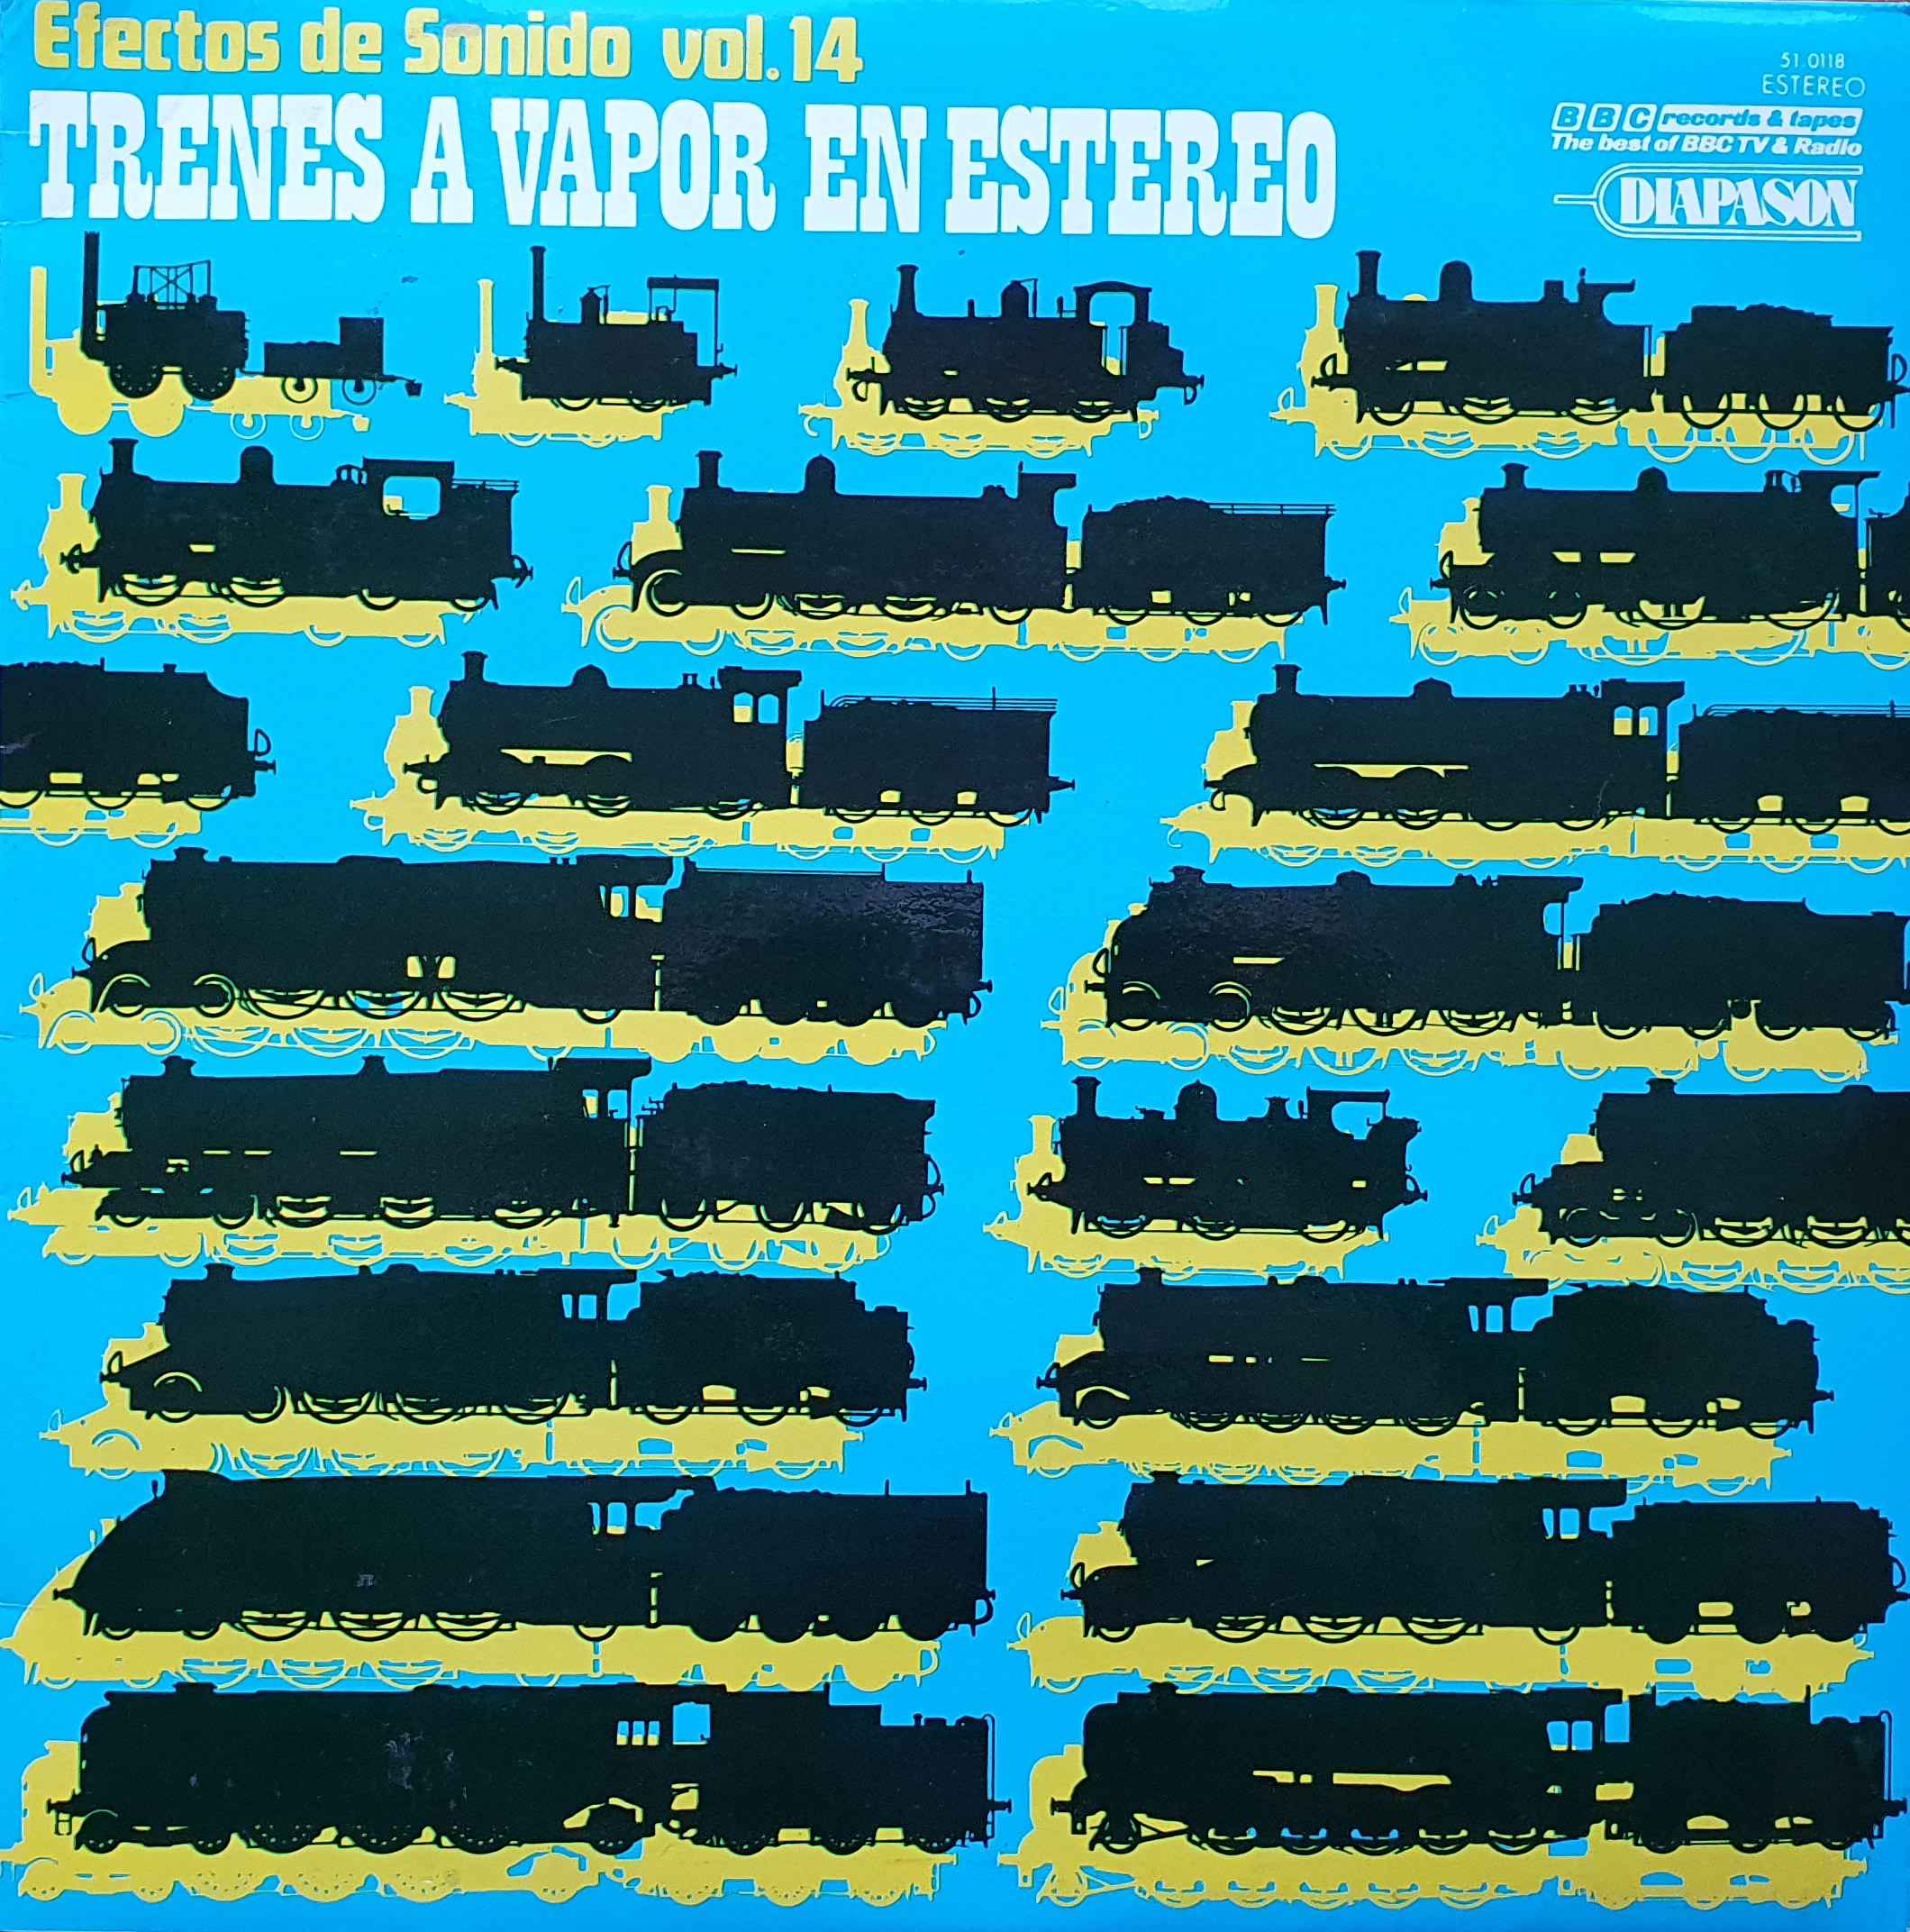 Picture of Trenes a vapor en estereo. Efectos de Sonido Vol. 14 by artist Various from the BBC albums - Records and Tapes library